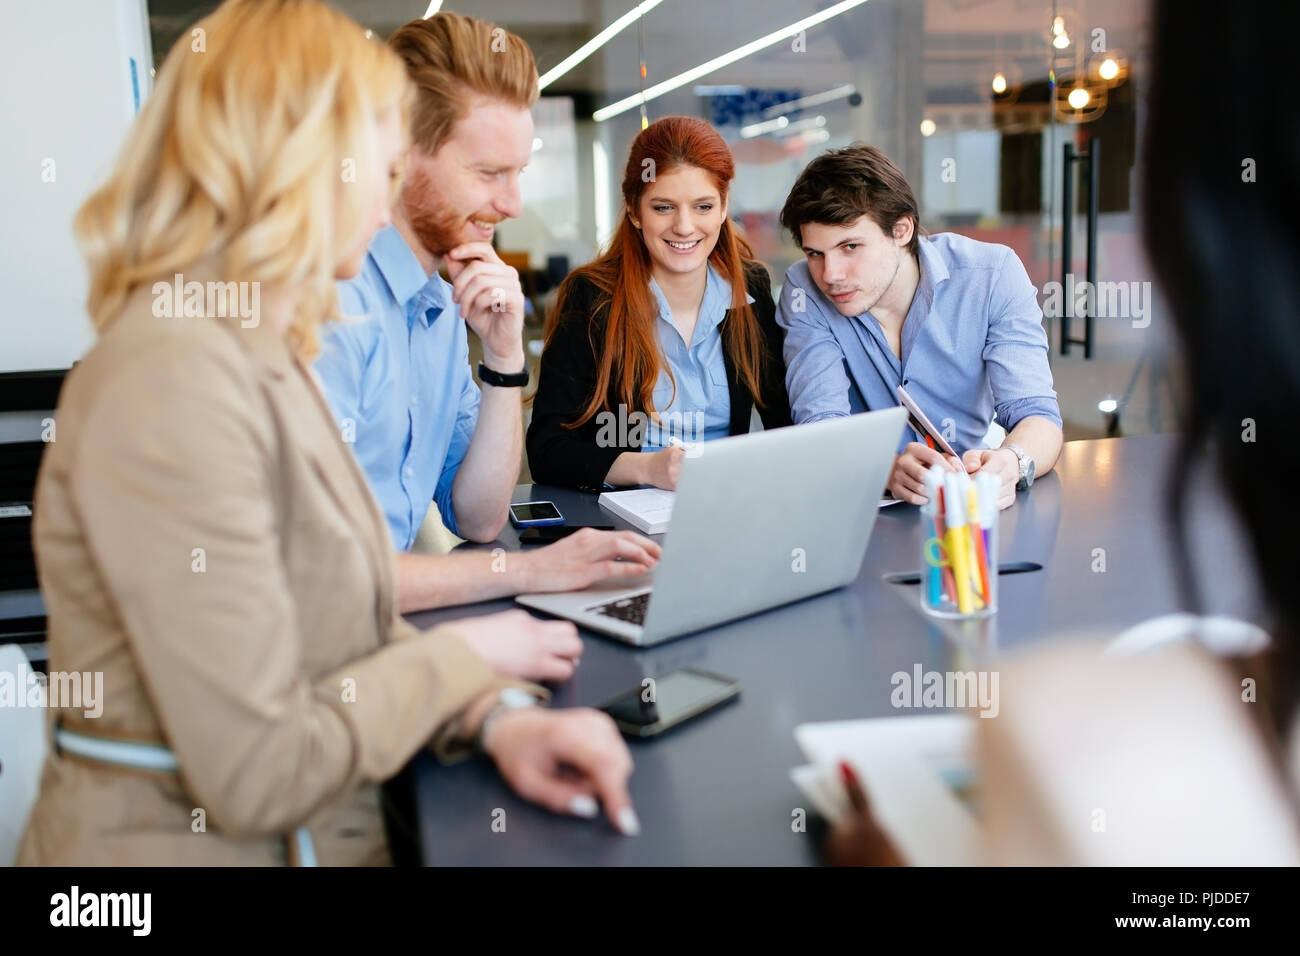 Business people collaborating in office Stock Photo